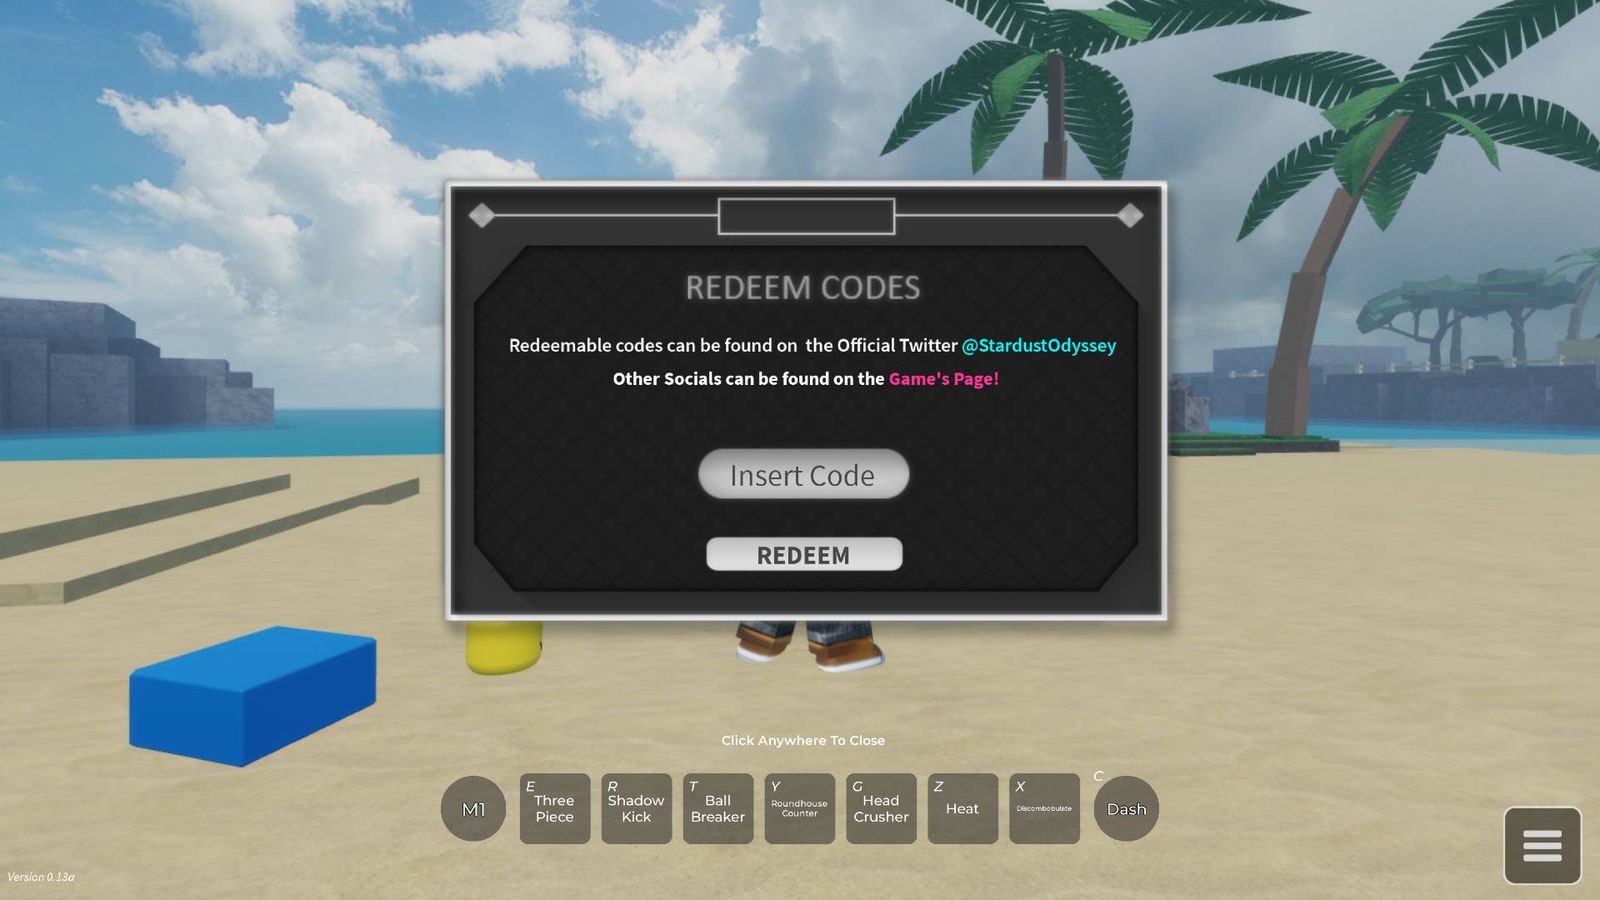 The code redemption screen in Stardust Odyssey.